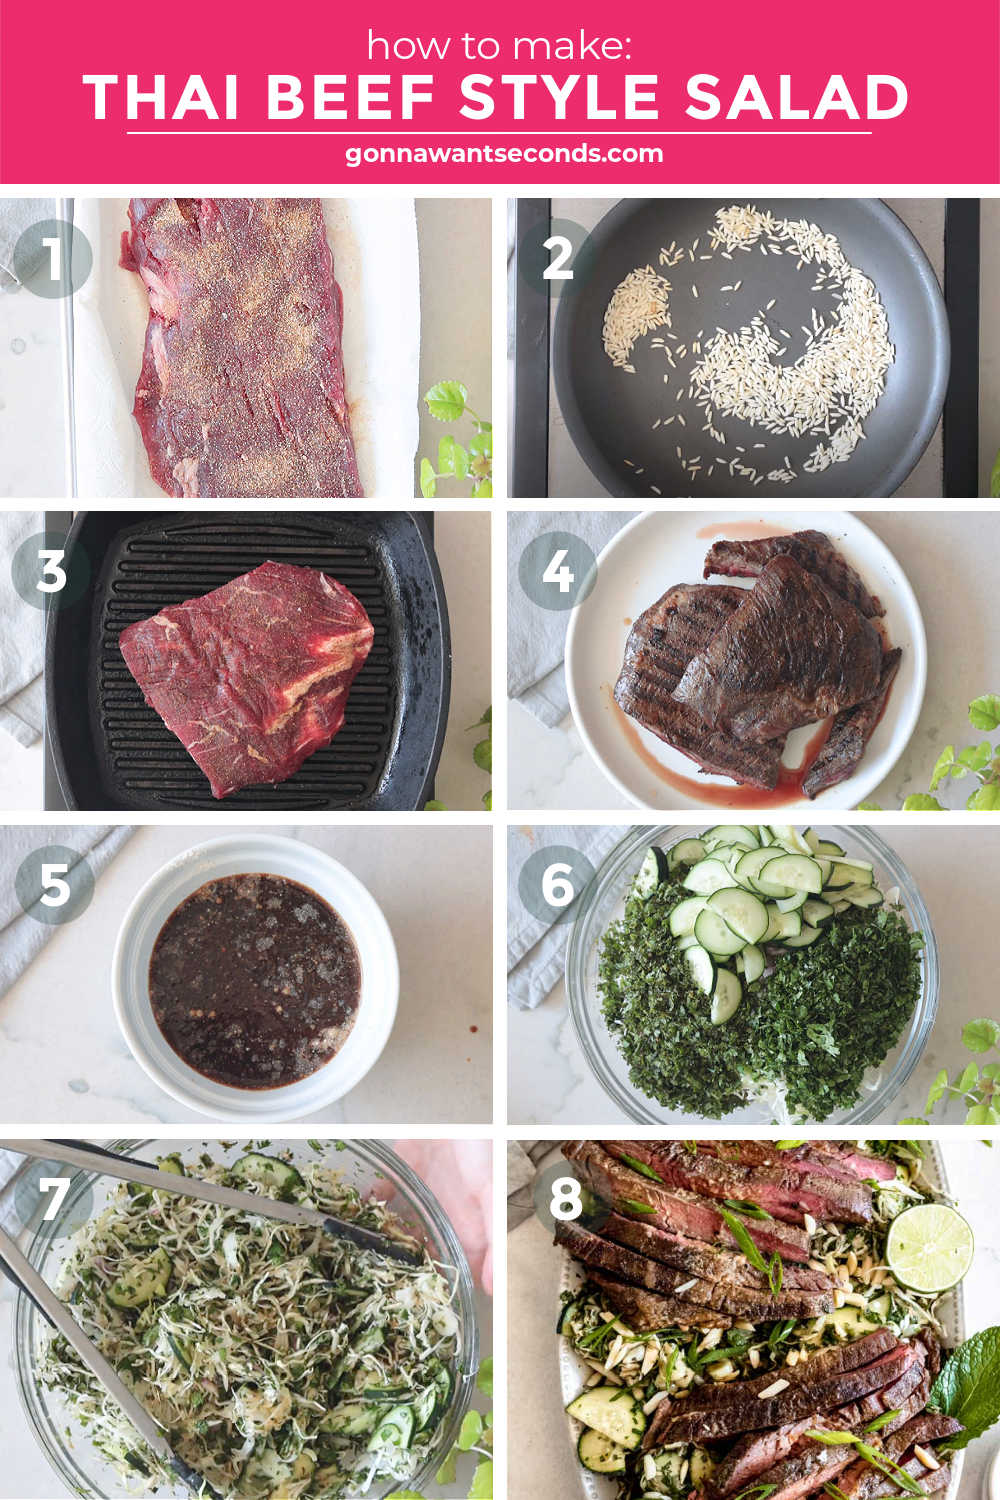 Step by step how to make thai style beef salad